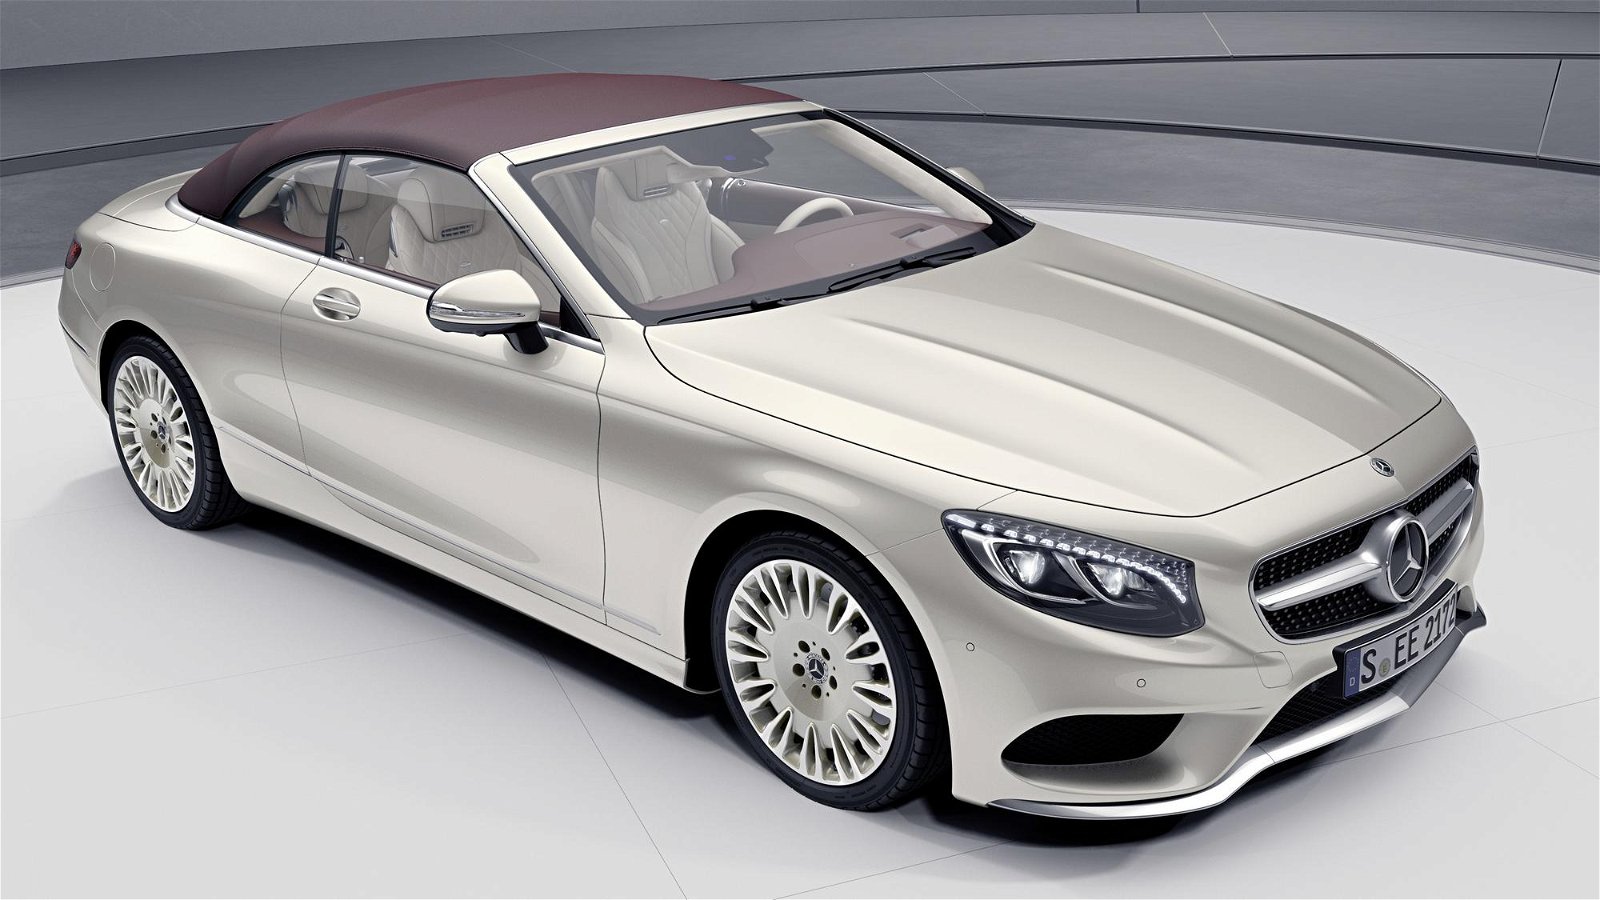 8 2018-Mercedes-Benz-S-Class-Coupe-Cabriolet-Exclusive-Edition-03-5131